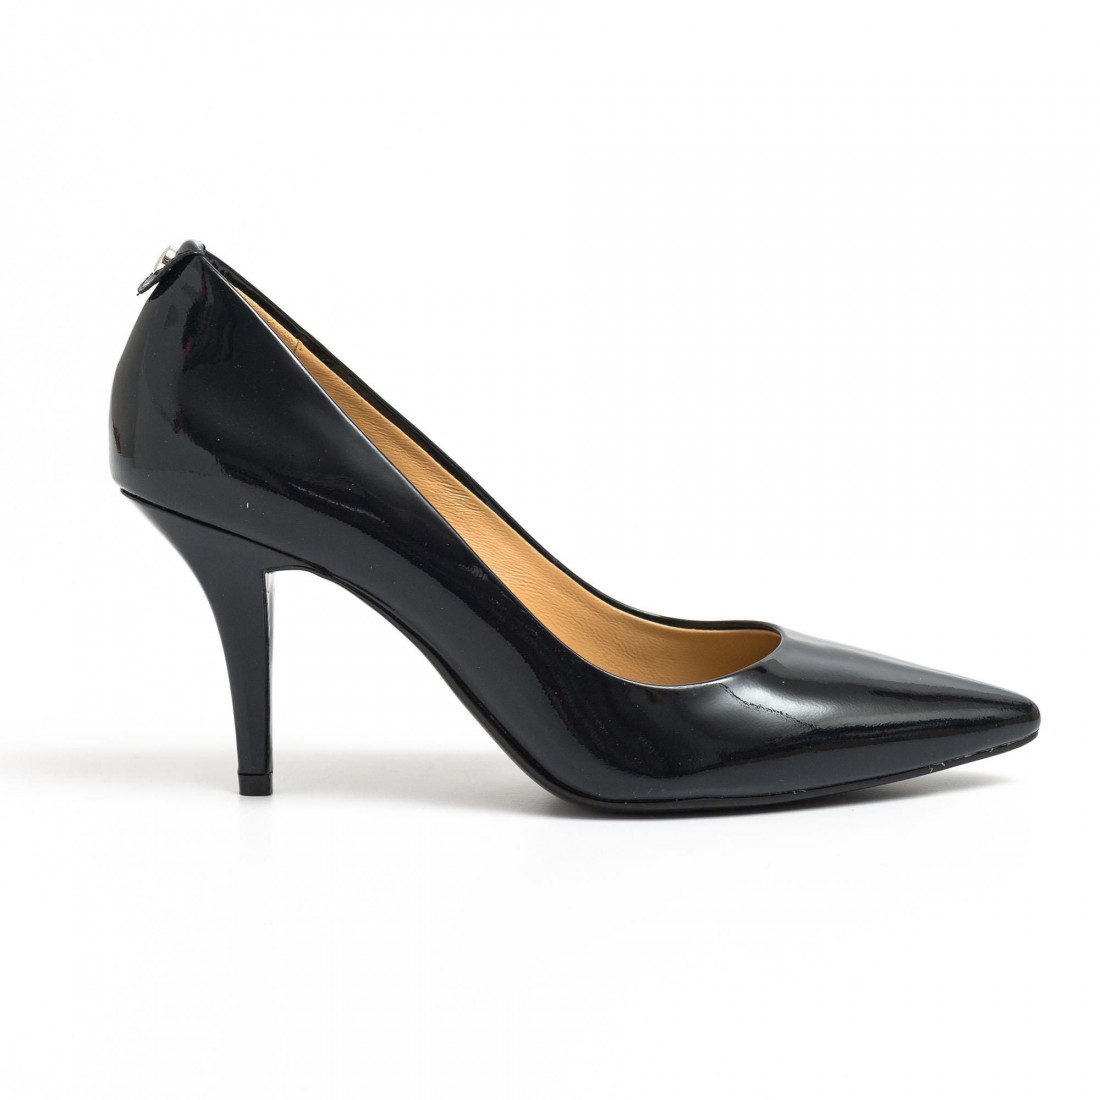 Michael Kors Mirabel pumps in patent leather with 85 mm heel Powder Color   The Mooder